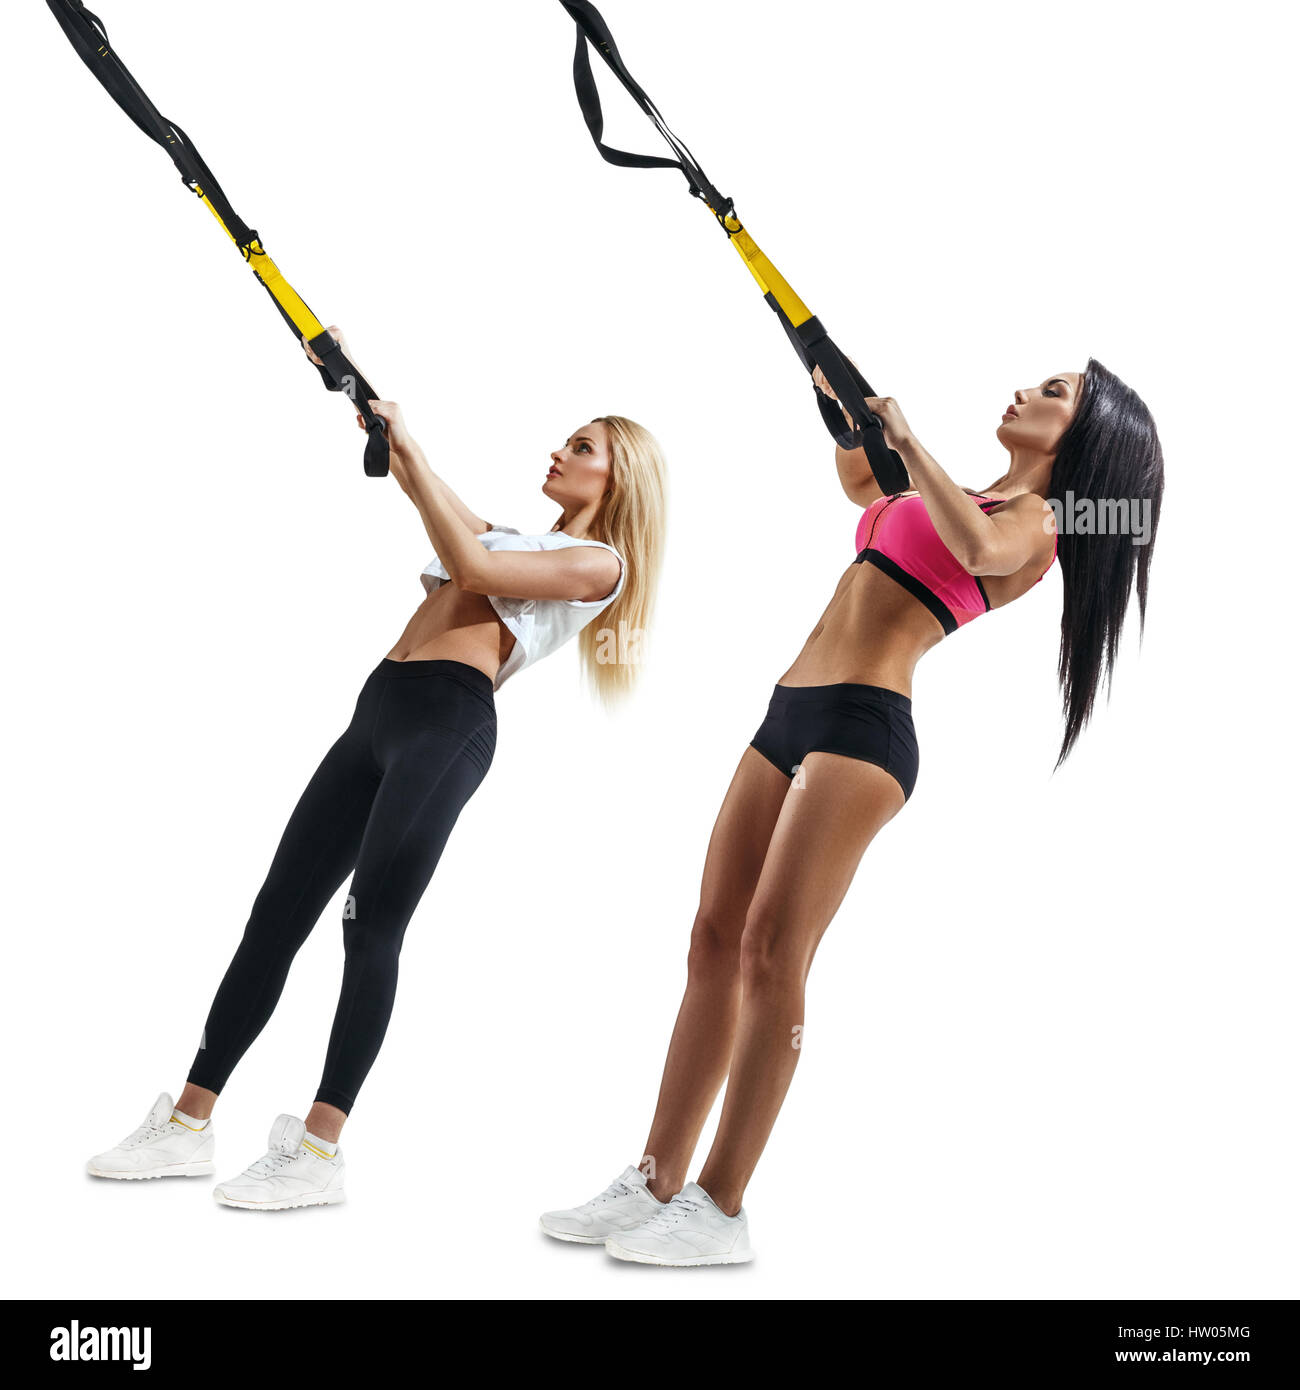 https://c8.alamy.com/comp/HW05MG/brunette-and-blonde-fitness-women-do-thrust-with-trx-suspension-workout-HW05MG.jpg